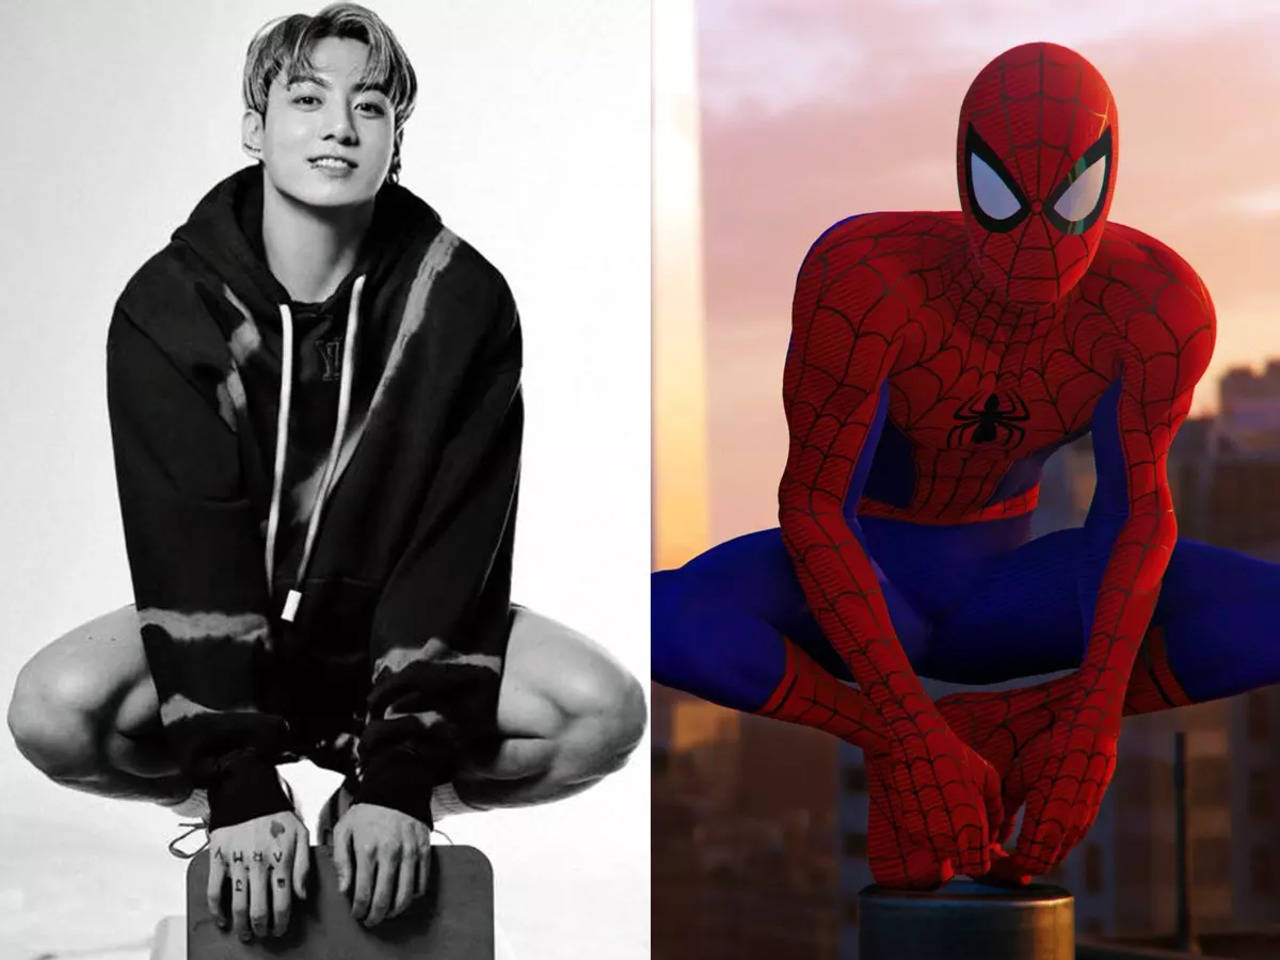 BTS ARMY think JungKook nailed Tom Holland's Spider-Man pose in latest  fashion photoshoot; call for Korean star to be next Spidey | K-pop Movie  News - Times of India